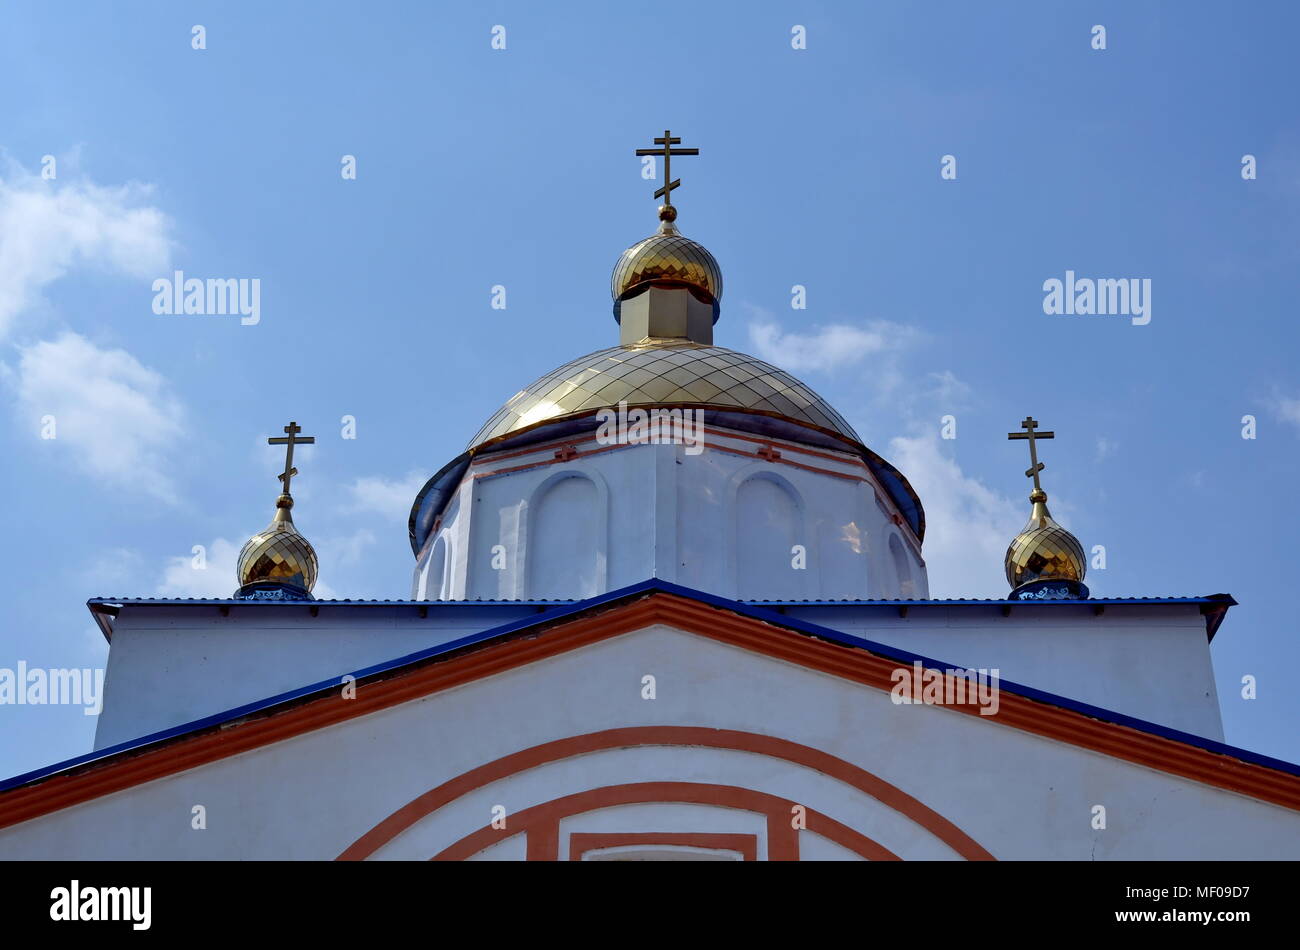 The top of the Orthodox church in Russia Stock Photo